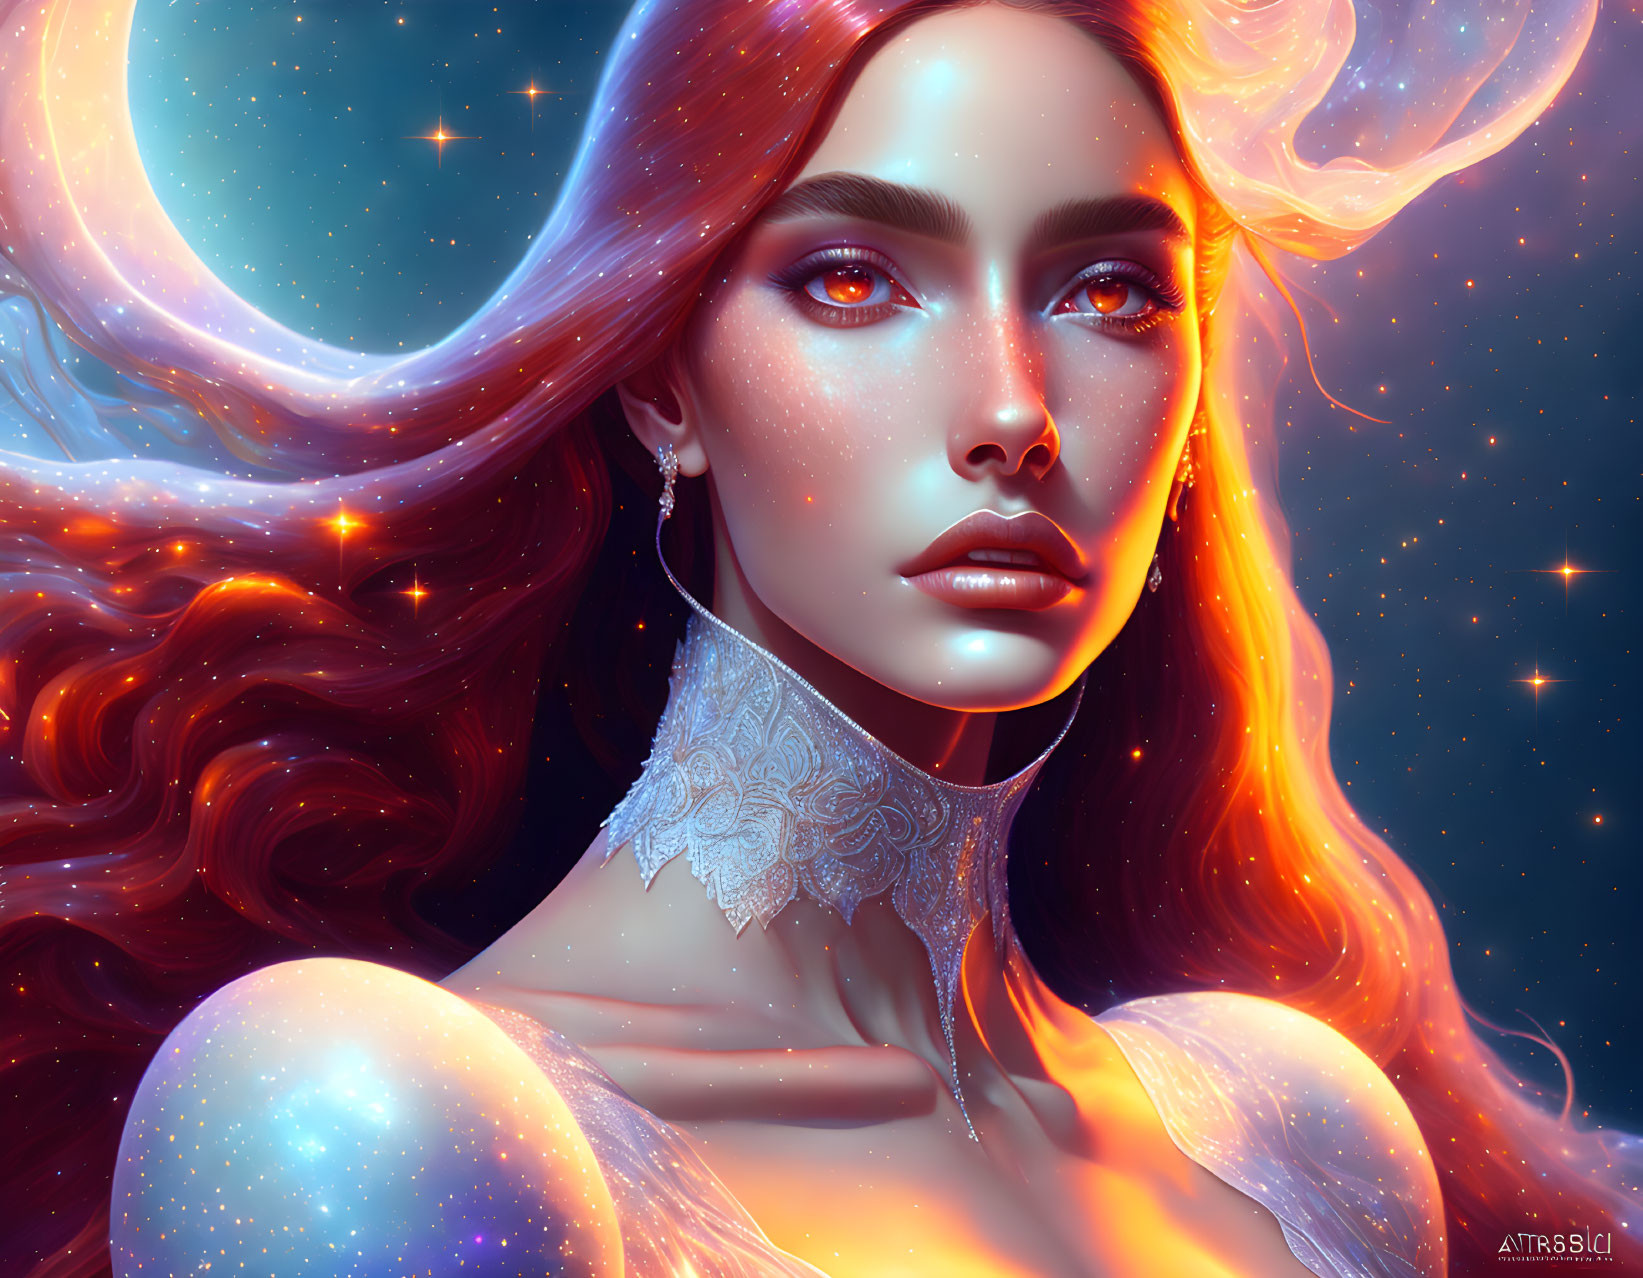 Cosmic-themed digital artwork of a woman with galaxy hair and blue eyes